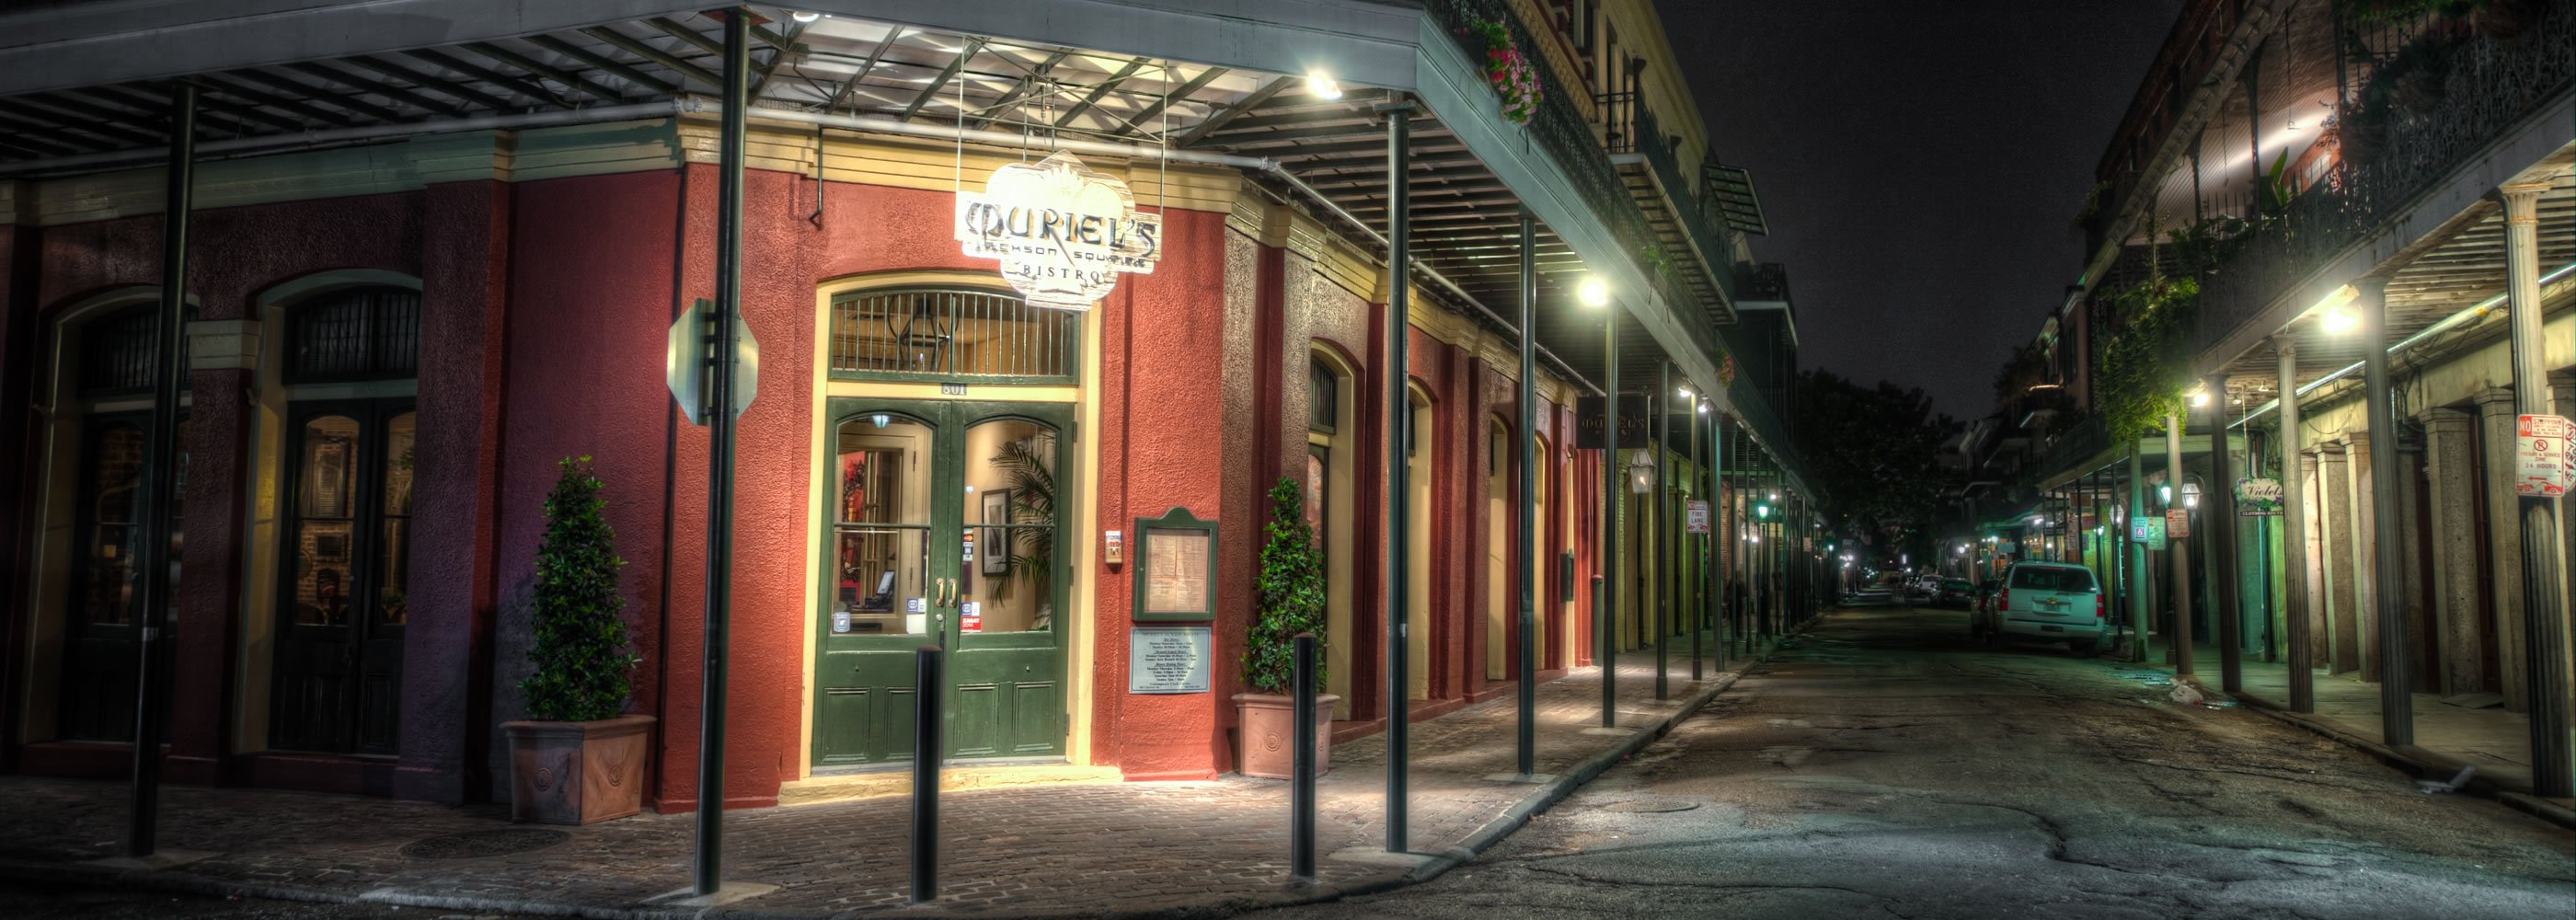 Muriel's Restaurant, widely regarded as one of the most haunted restaurants in the French Quarter